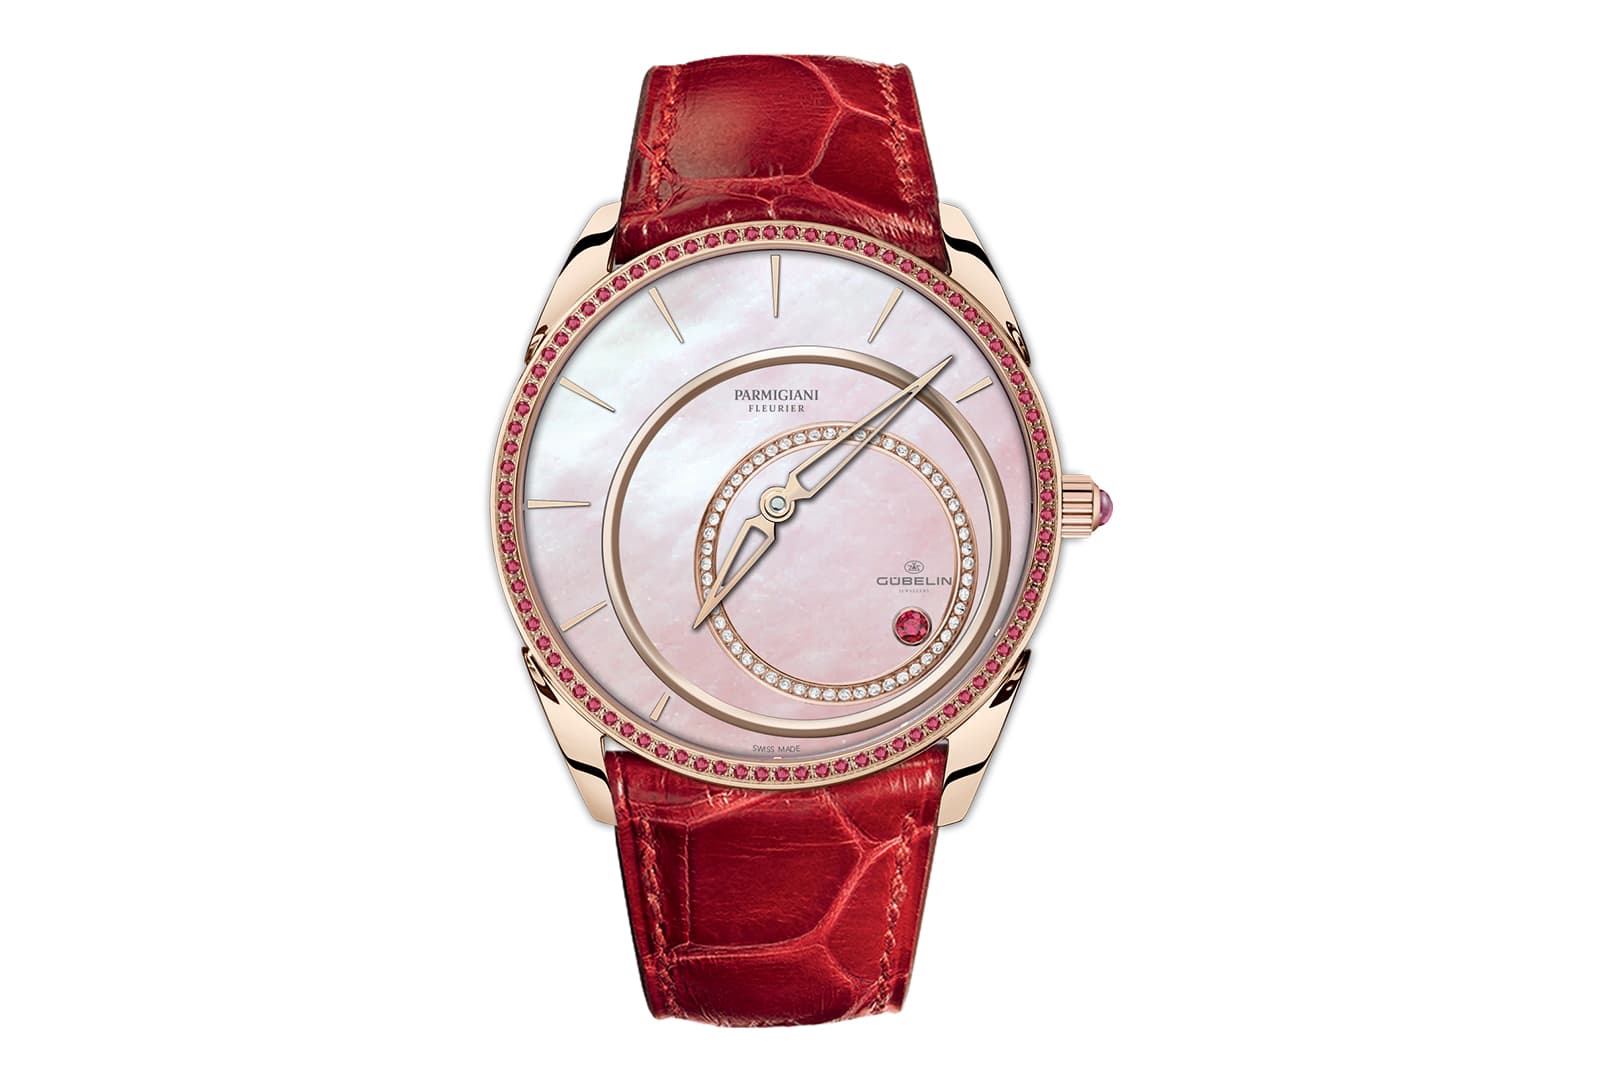 Parmigiani Fleurier timepiece with mother-of-pearl dial and red gold case paved with rubies